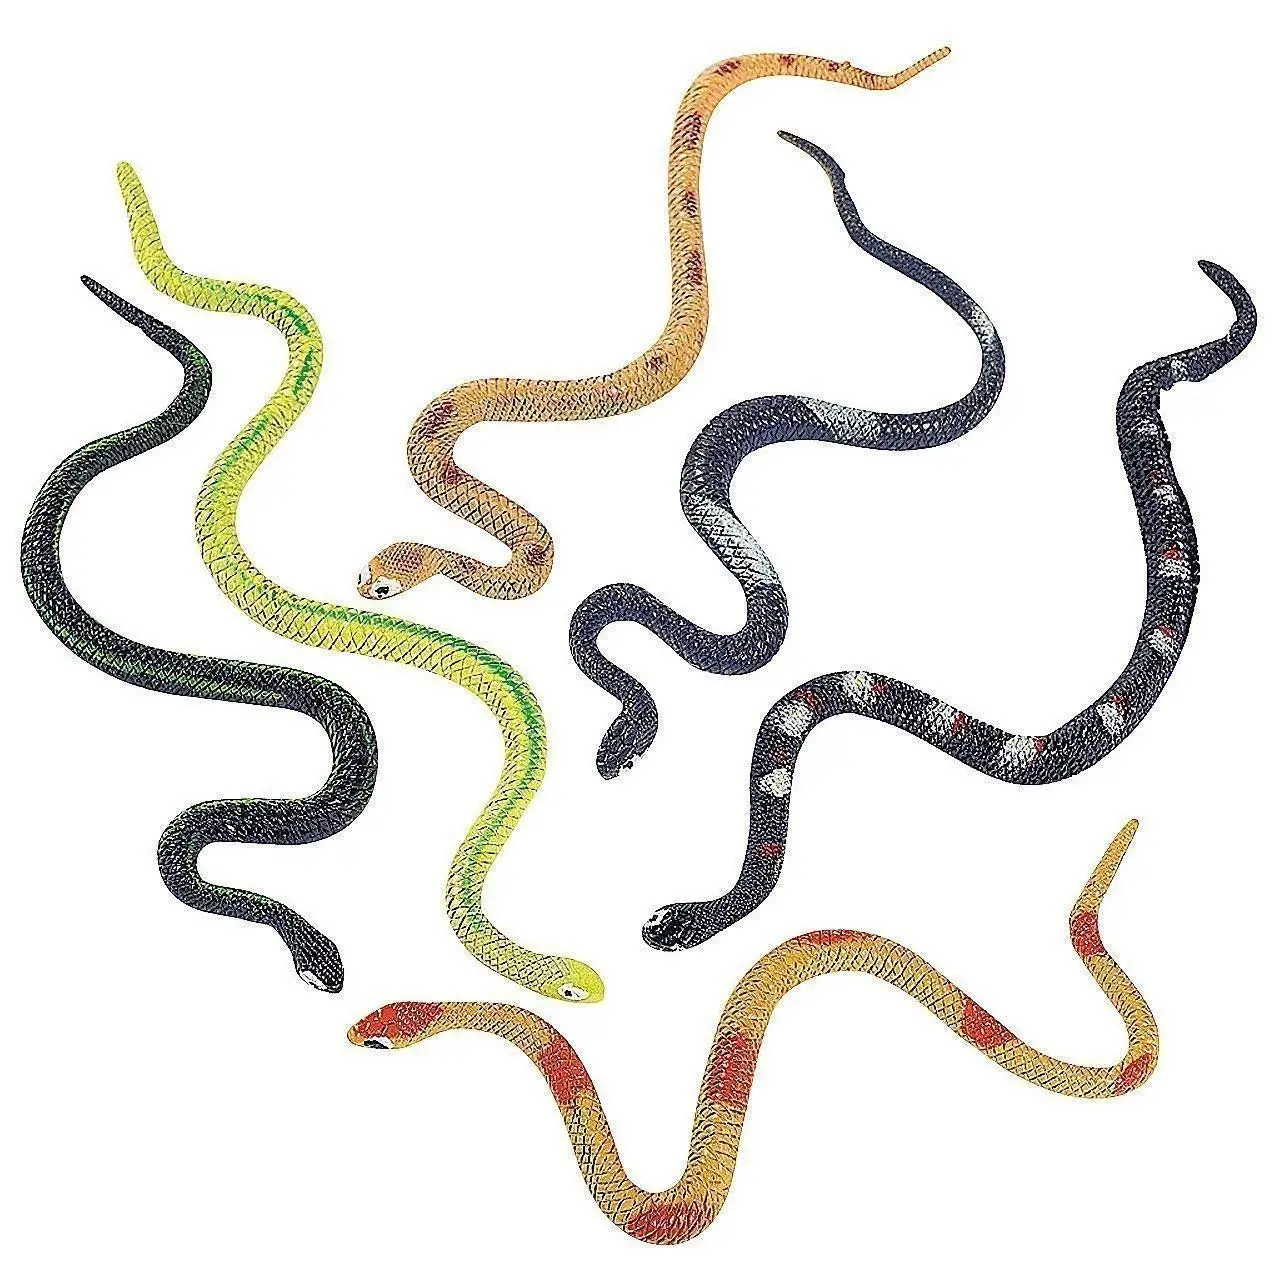 3 NEW RAIN FOREST RUBBER SNAKES  PRETEND JUNGLE SNAKE 14" TOY REPTILE 